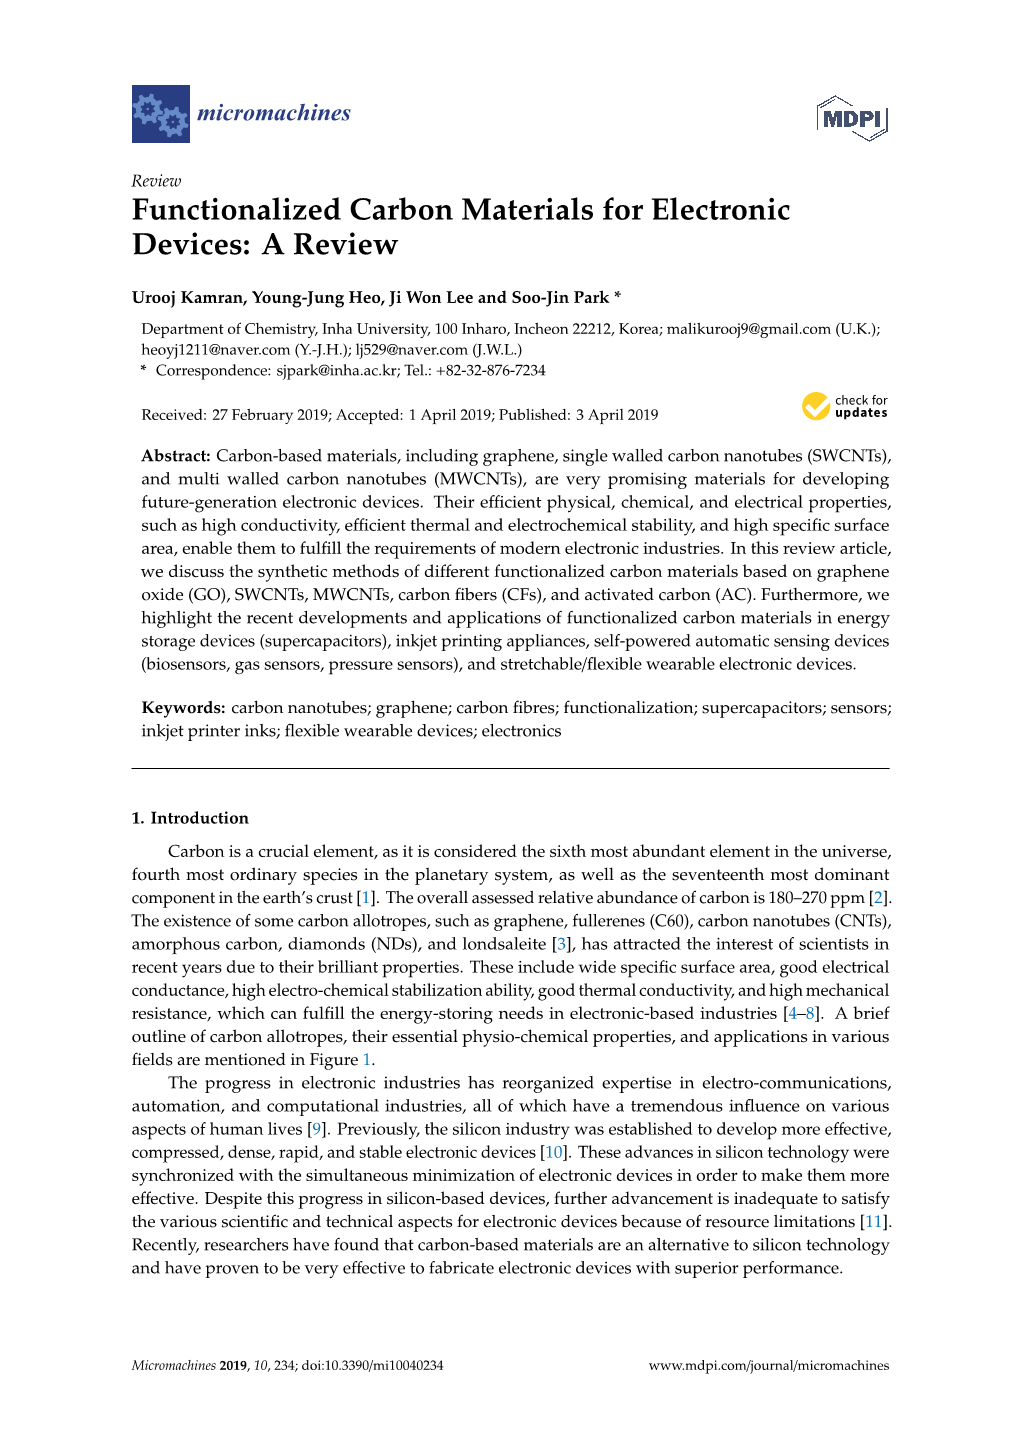 Functionalized Carbon Materials for Electronic Devices: a Review